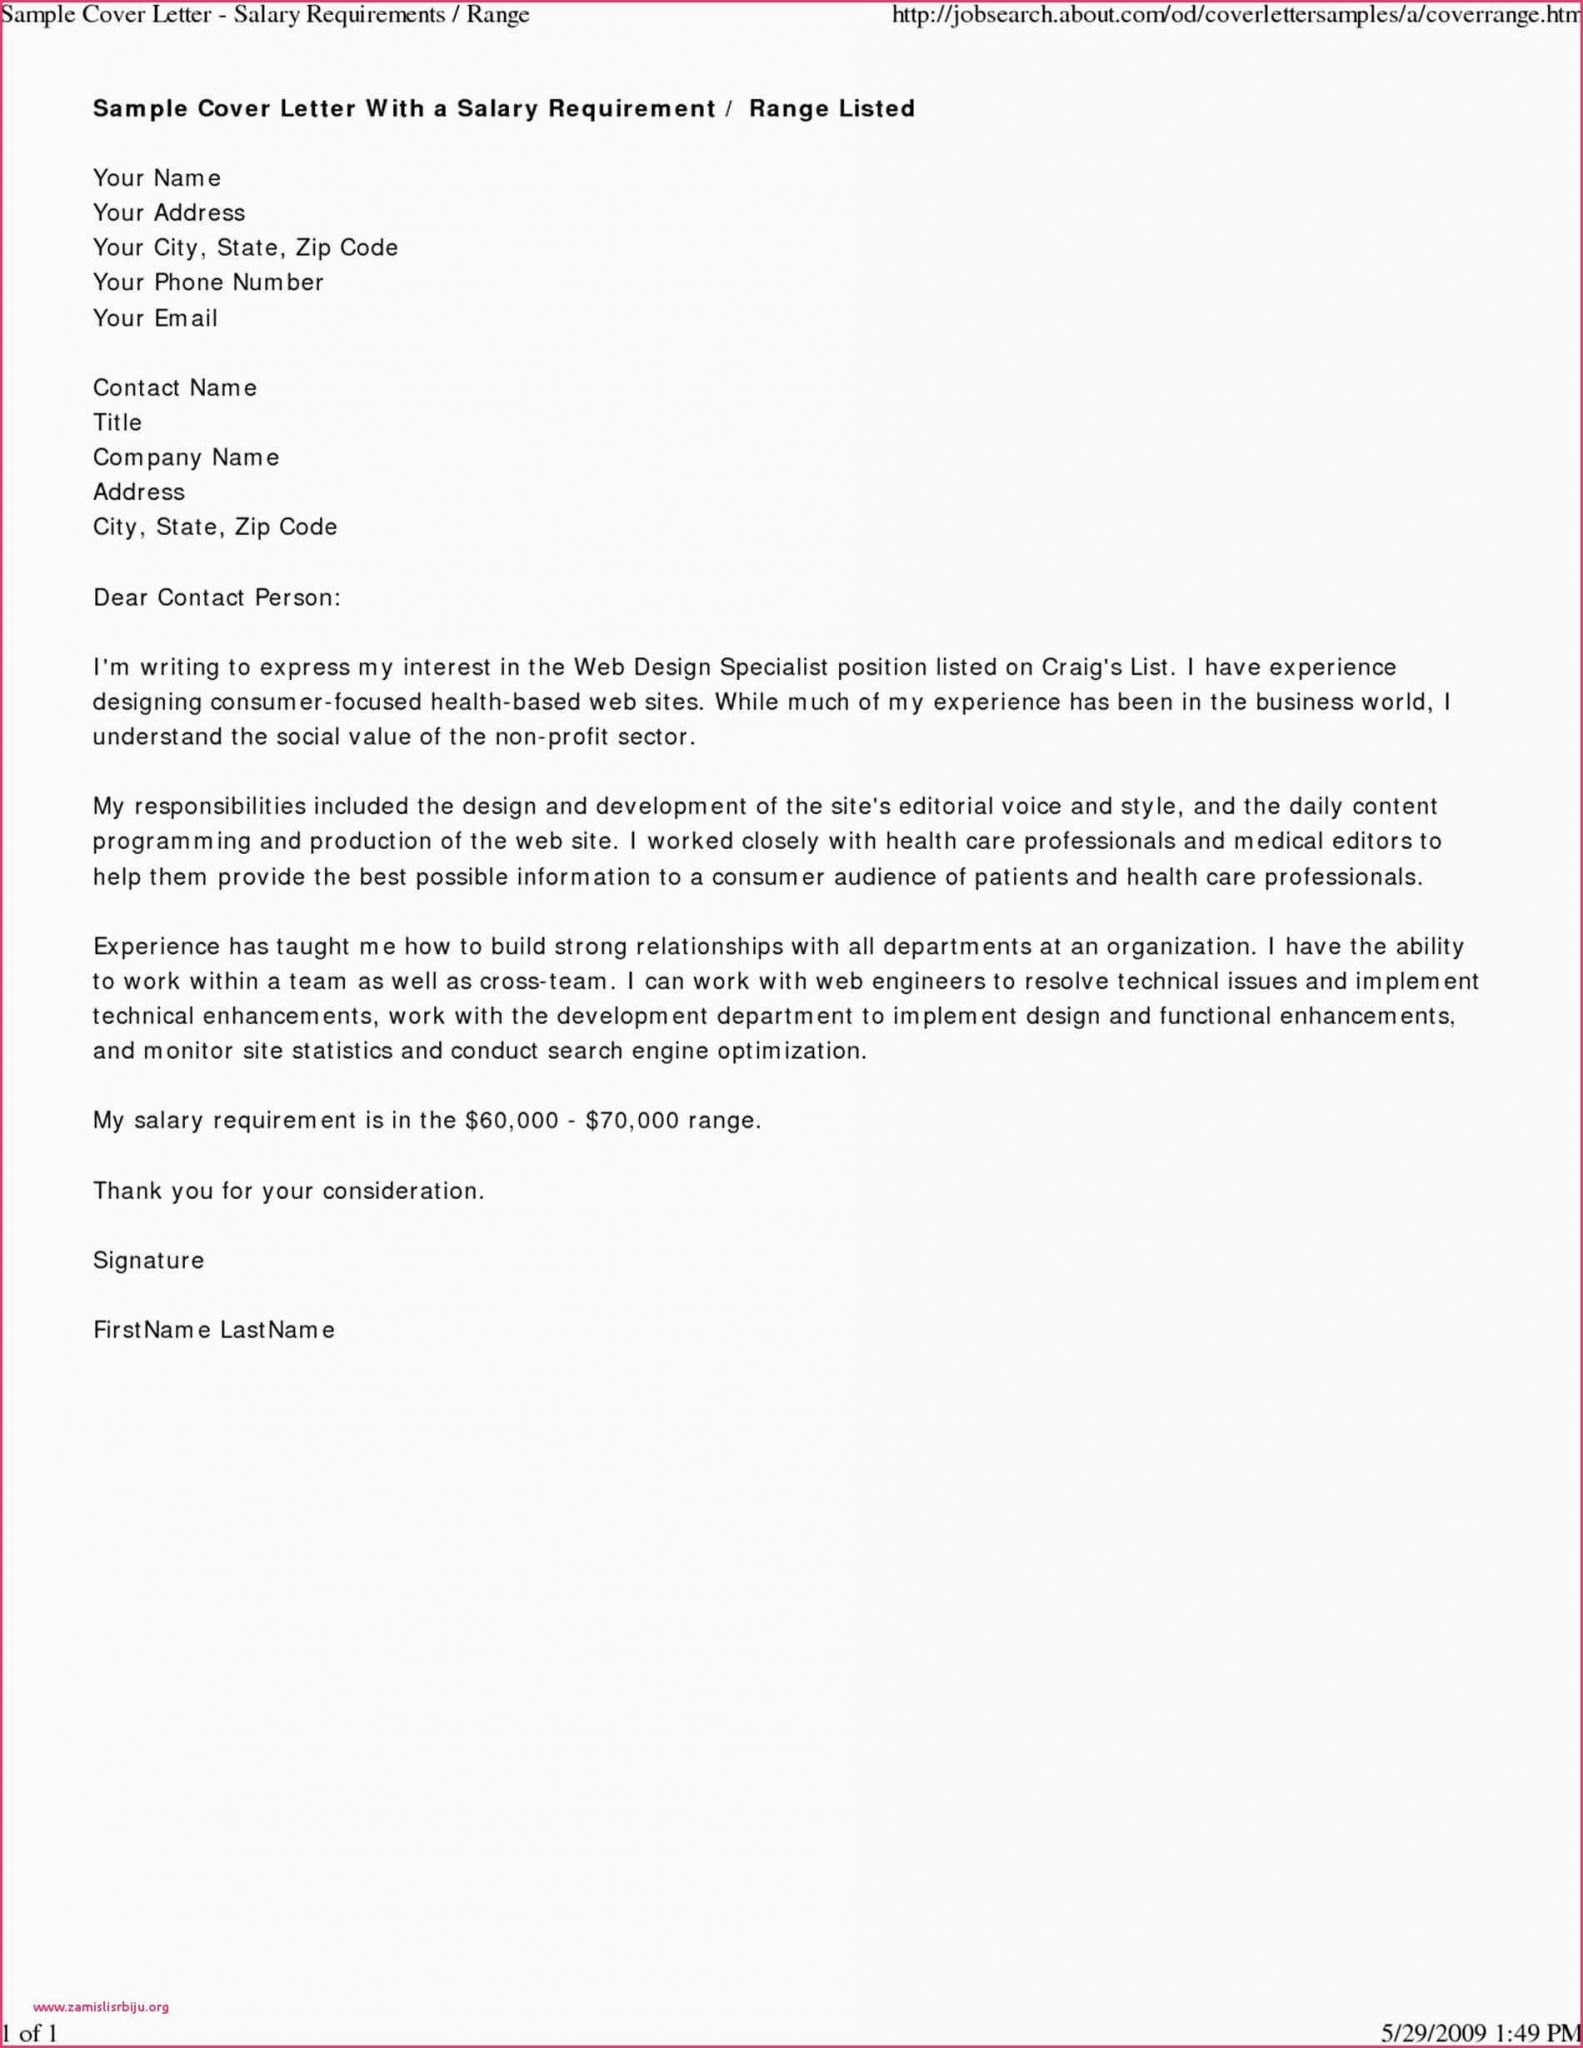 Sample Letter Requesting Sales Tax Exemption Certificate Regarding Resale Certificate Request Letter Template